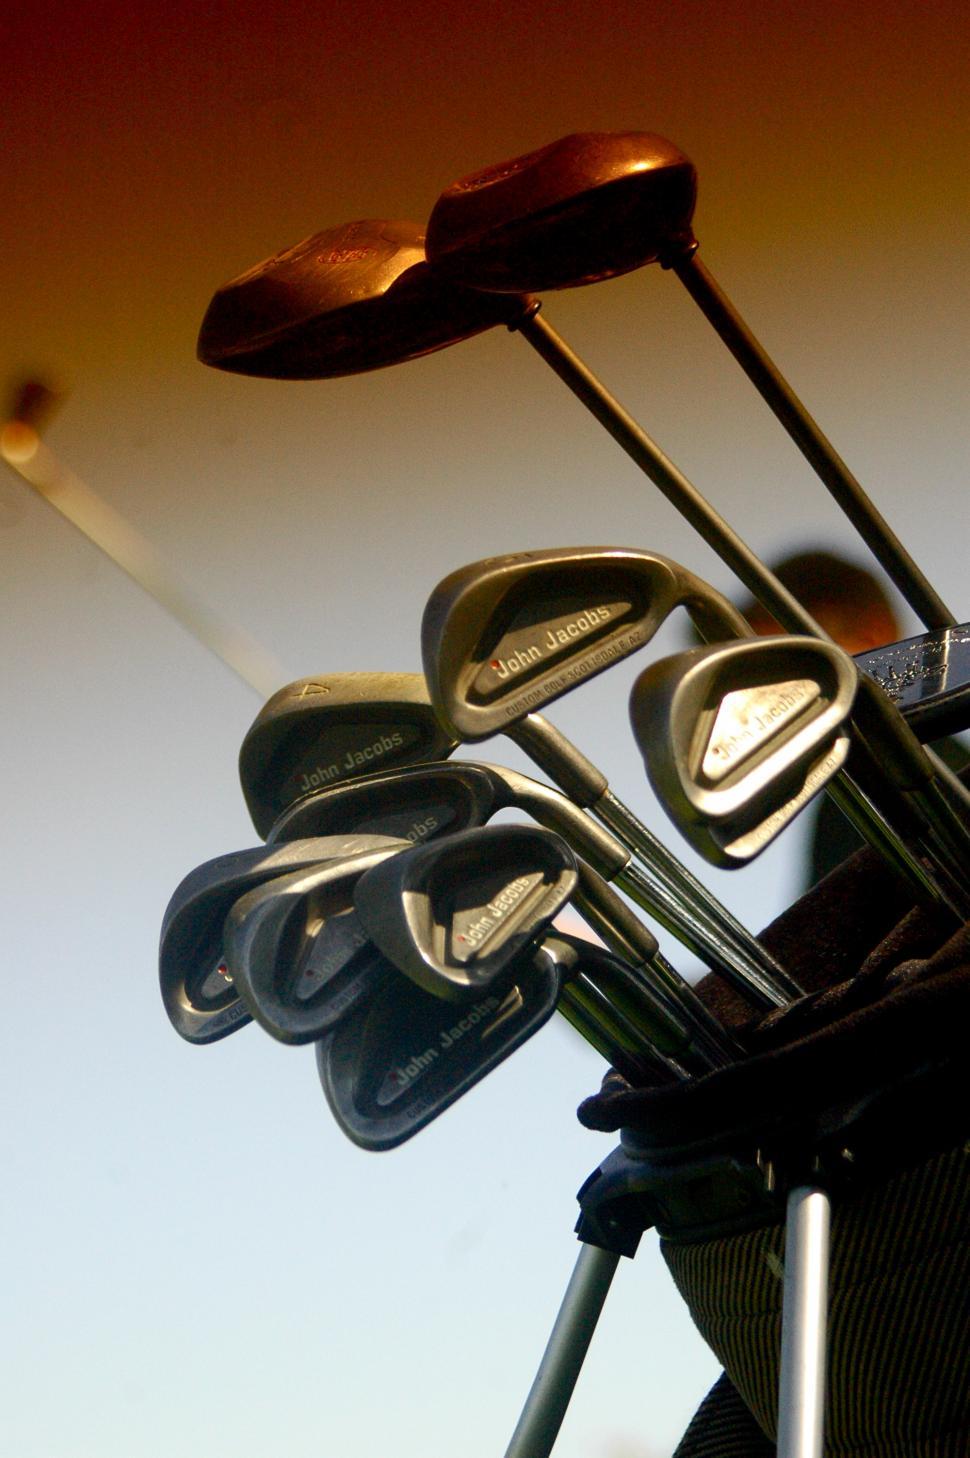 Free Image of Golf Club on the Golf course 